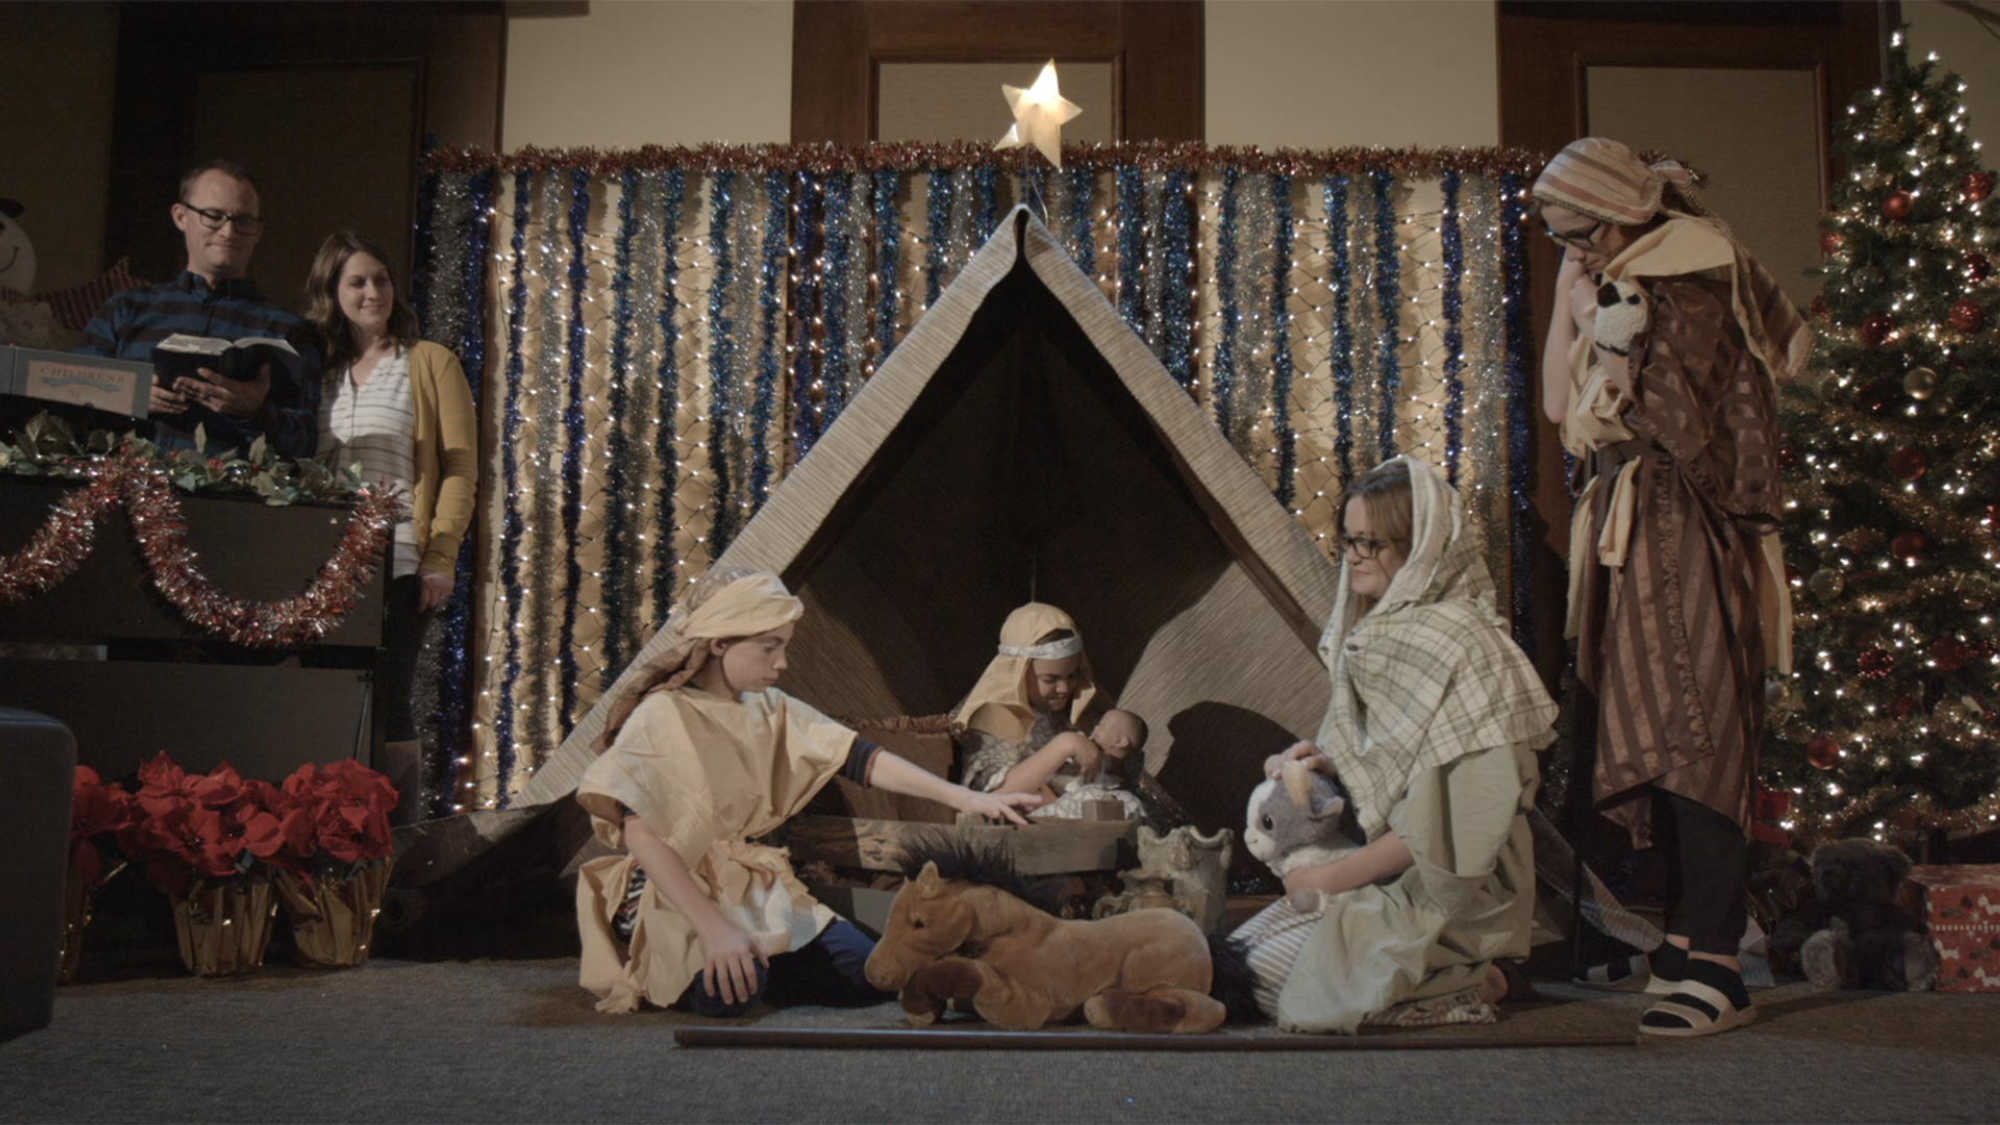 A family performing a Nativity scene.